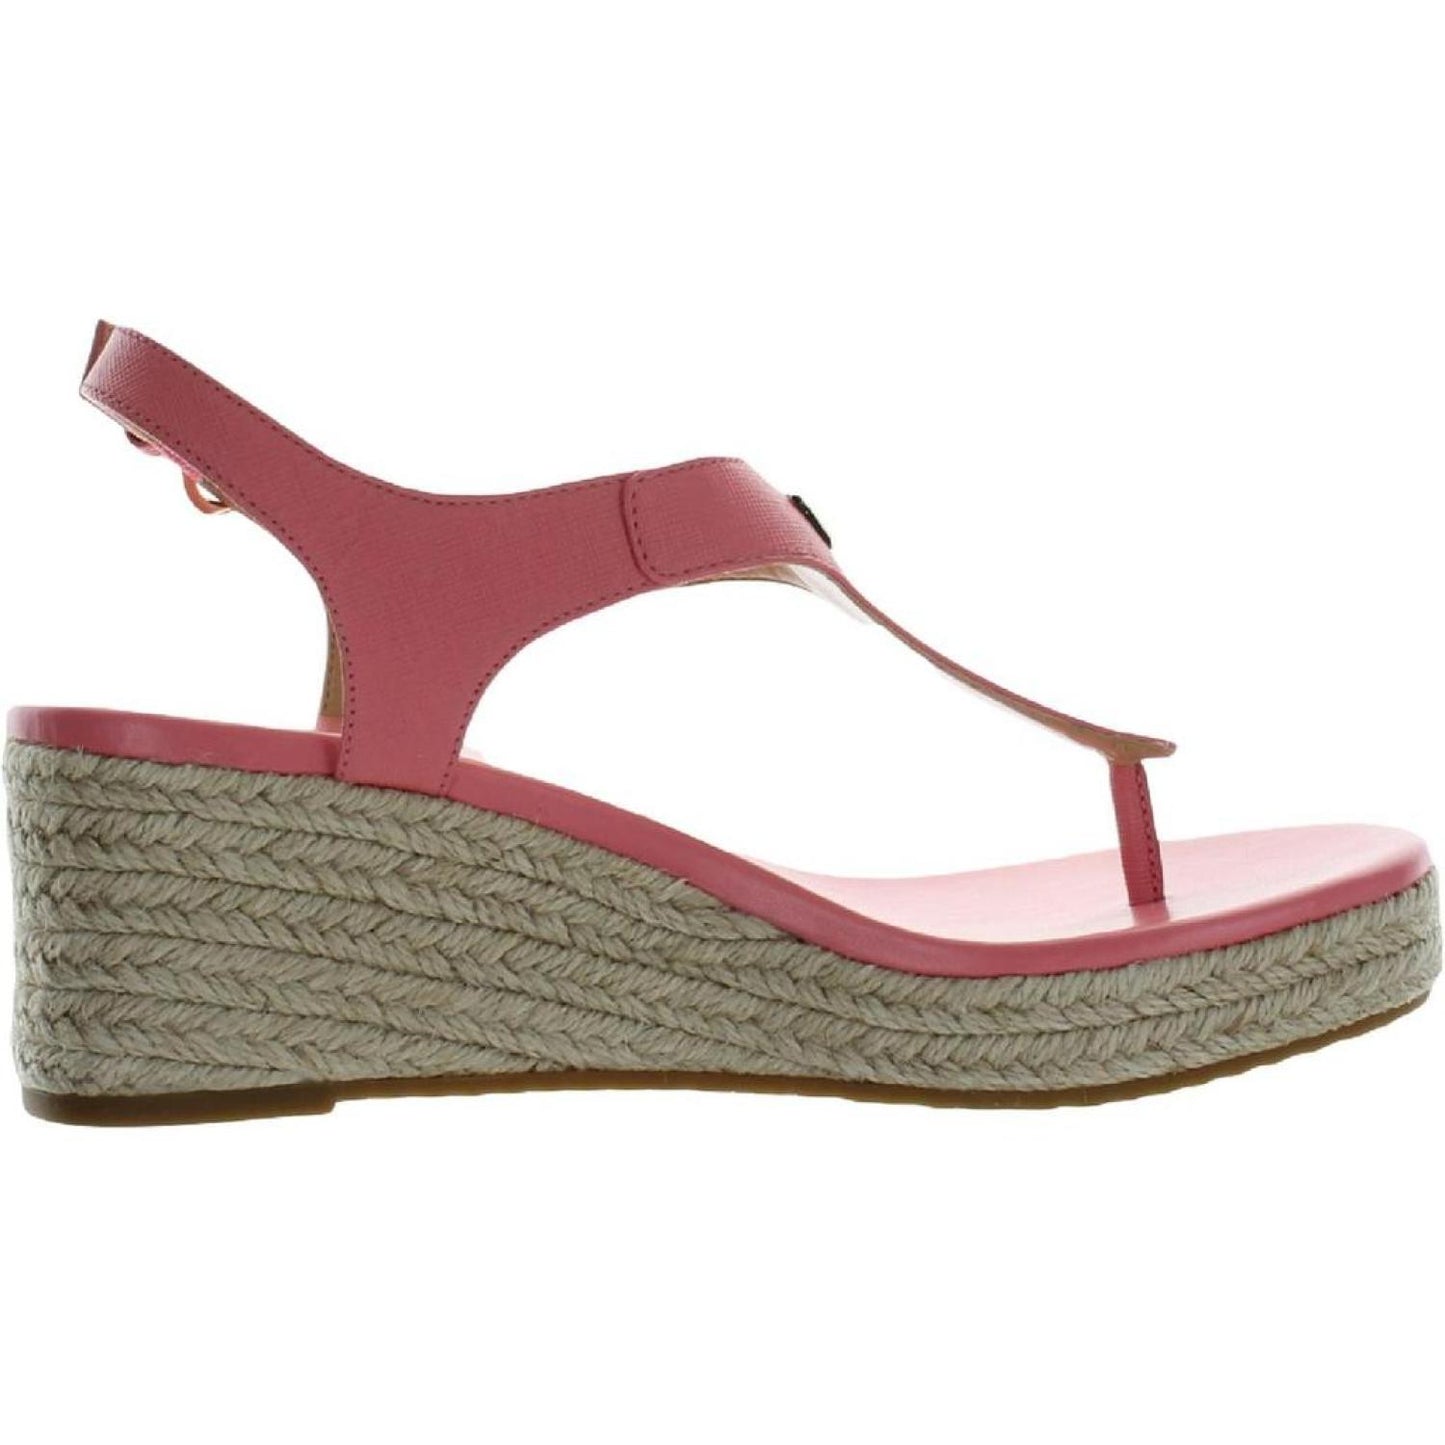 Laney Womens Leather Thong Espadrilles